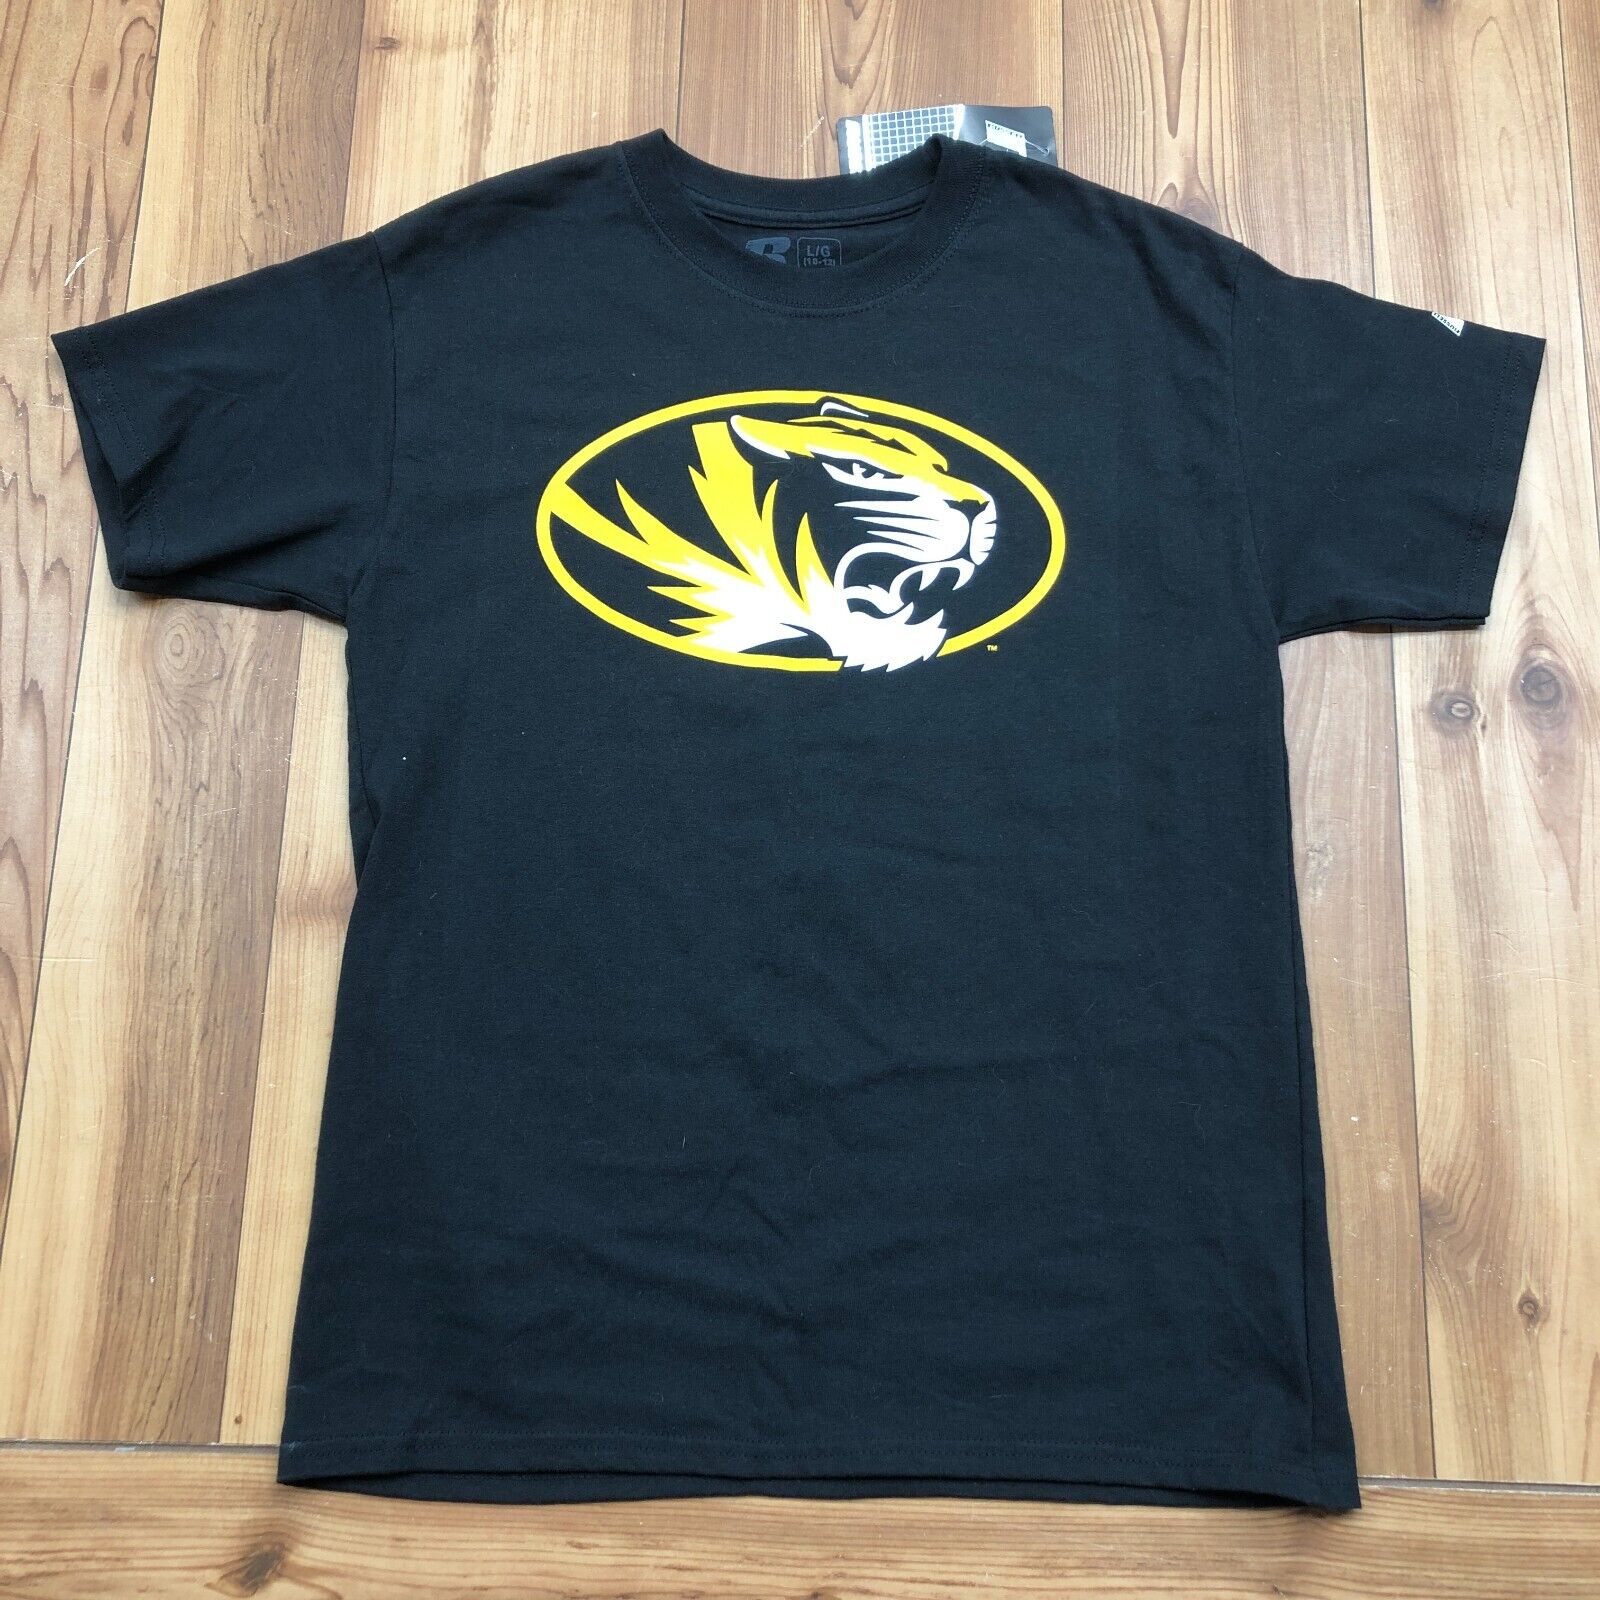 NEW Russell Black Missouri Tigers Graphic Short Sleeve T-Shirt Youth Size L